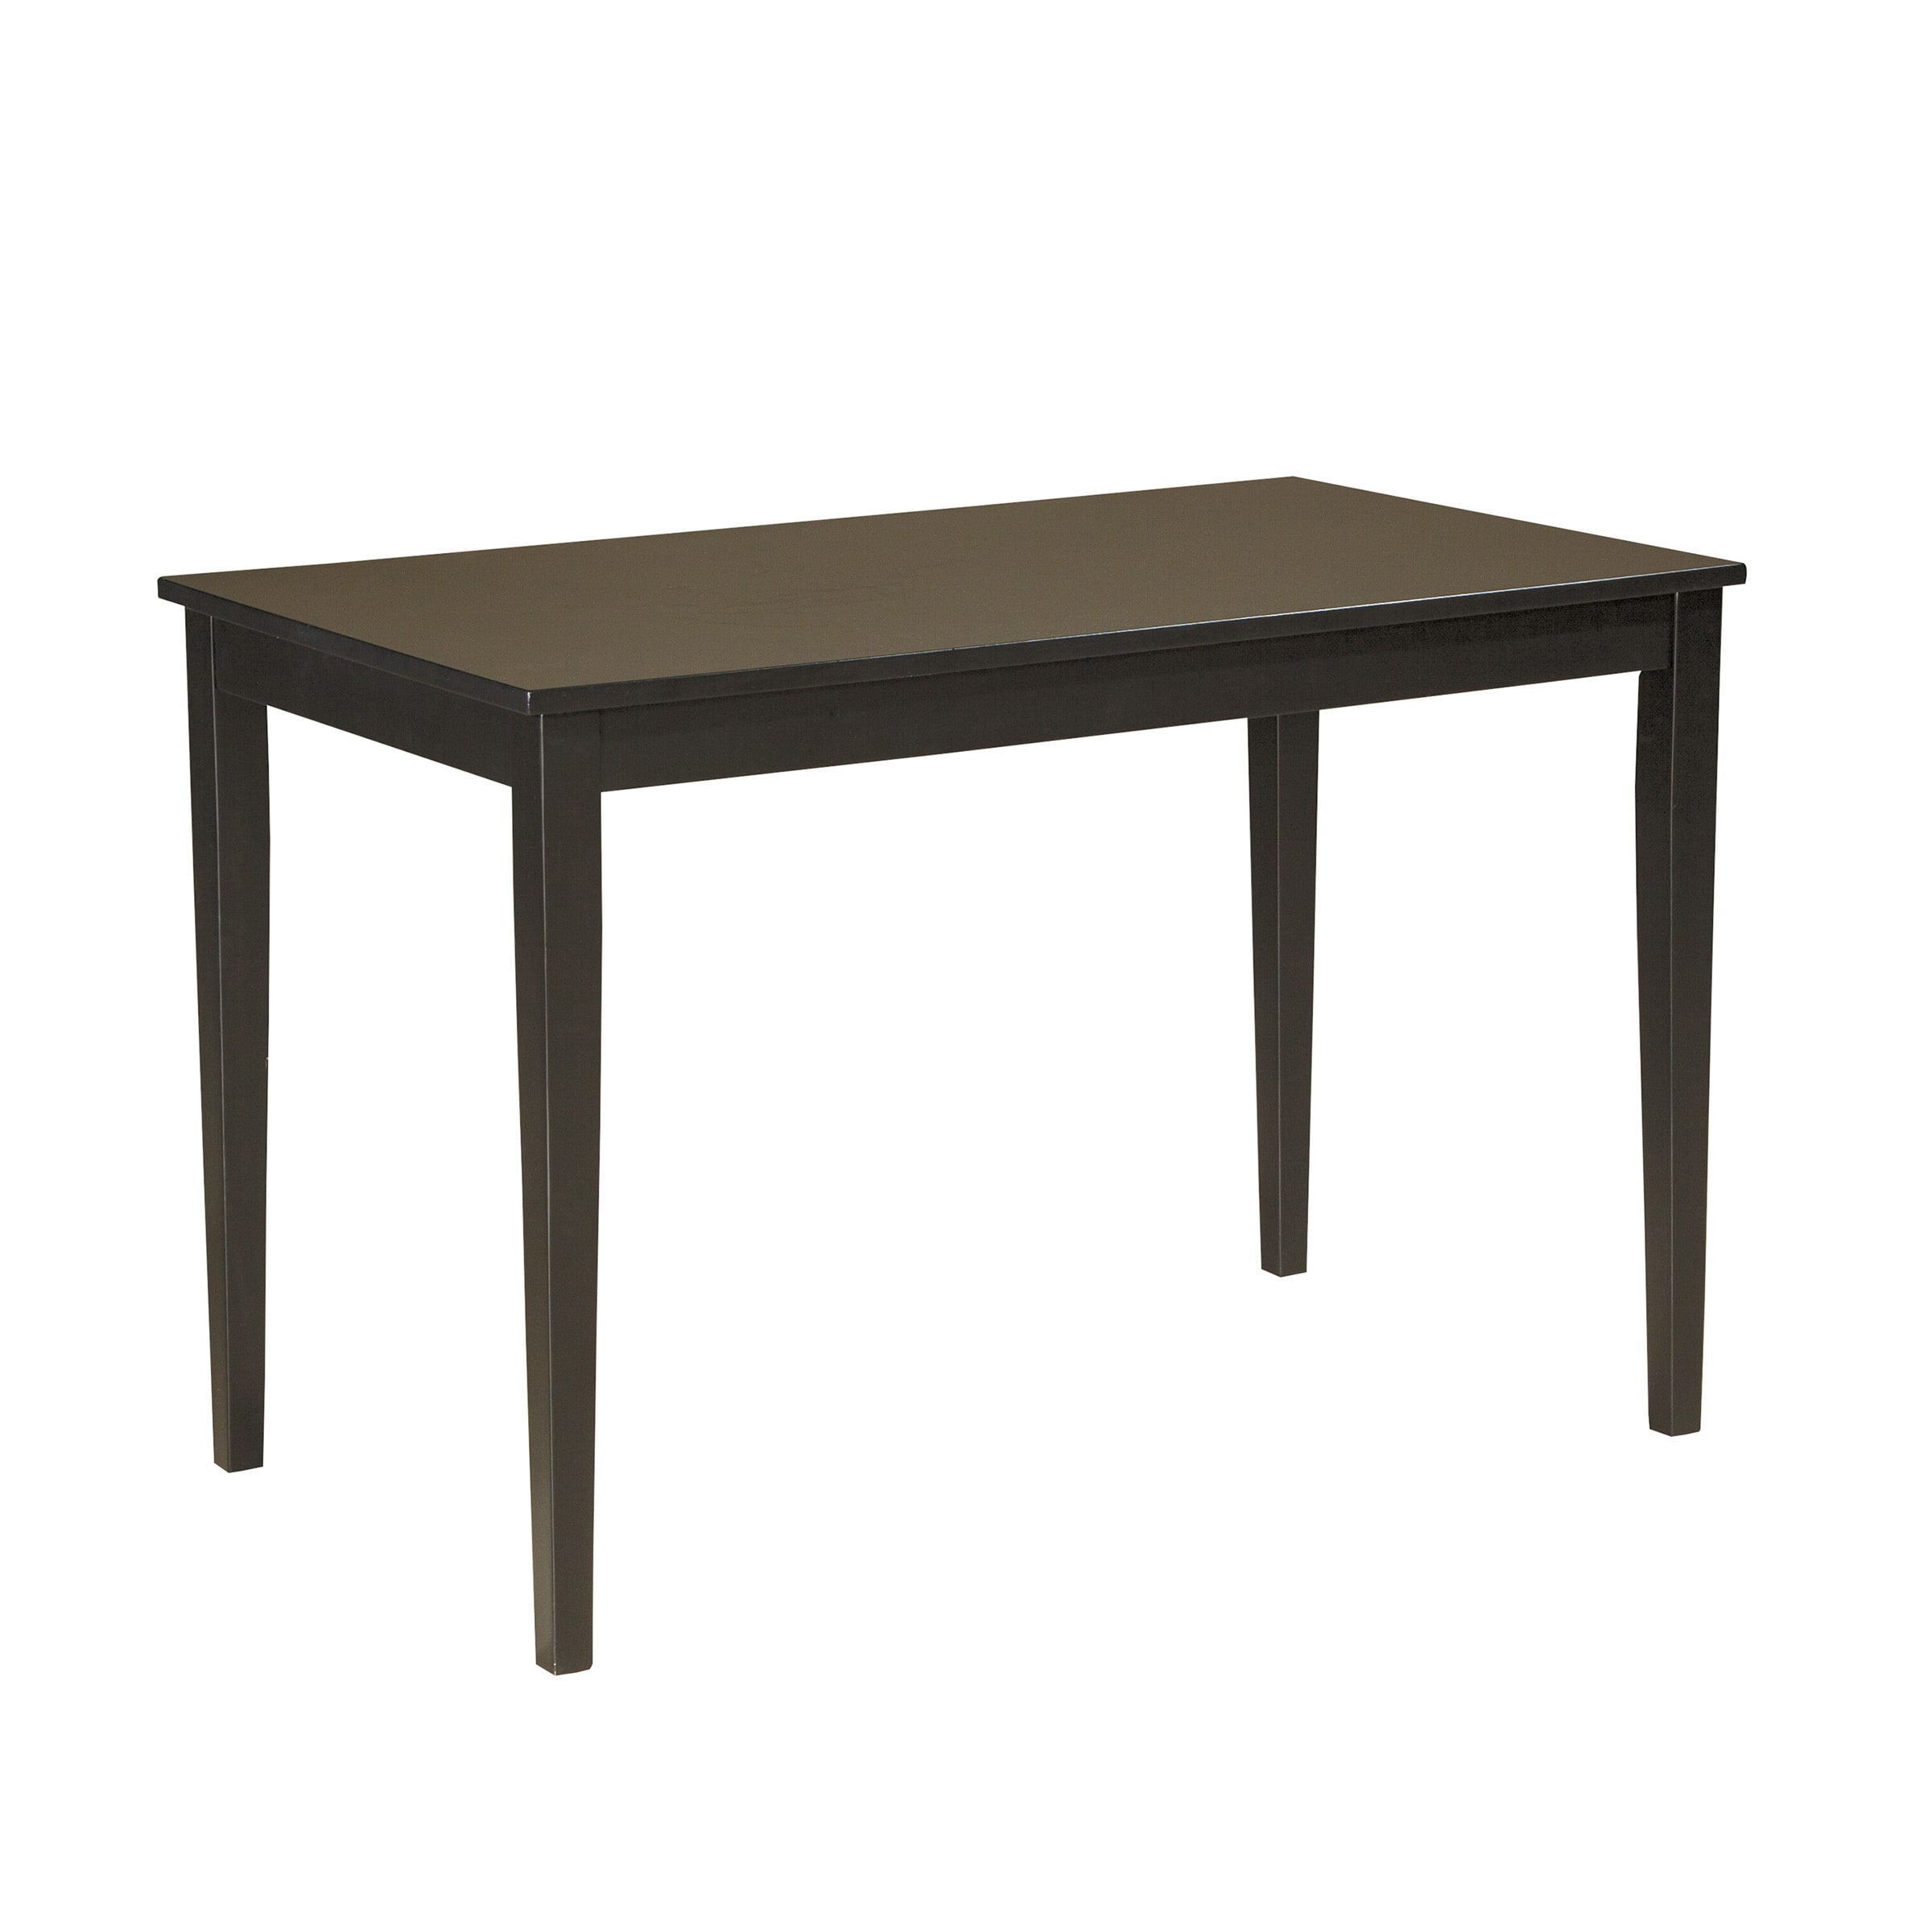 Shop Signature Design by Ashley Kimonte Rectangular Dining Room Table